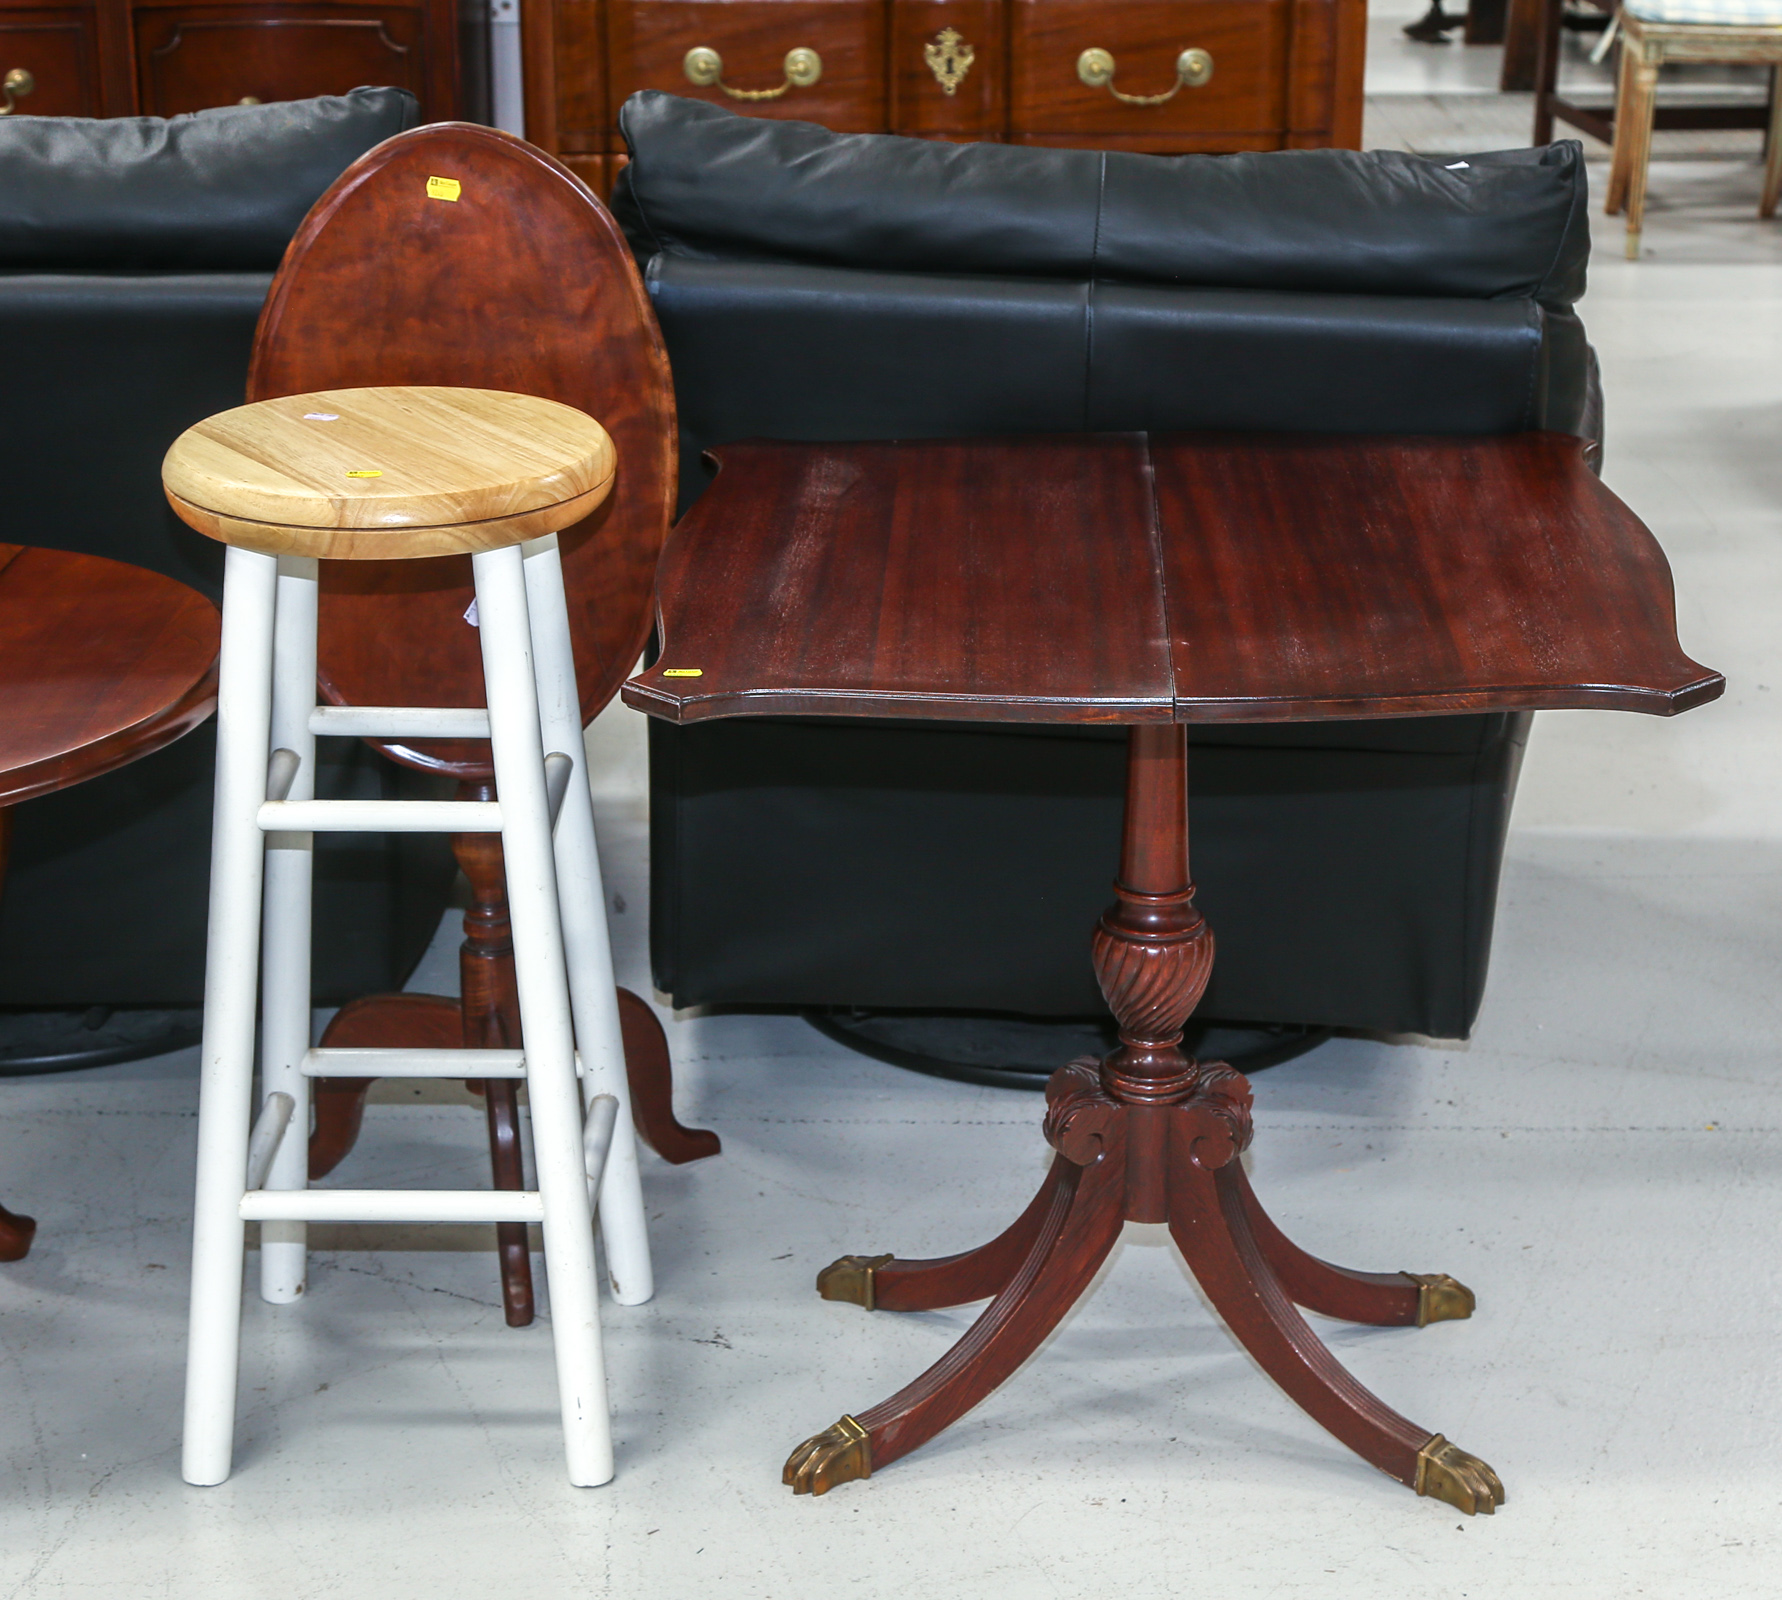 FEDERAL STYLE CARD TABLE & A STOOL Comprising